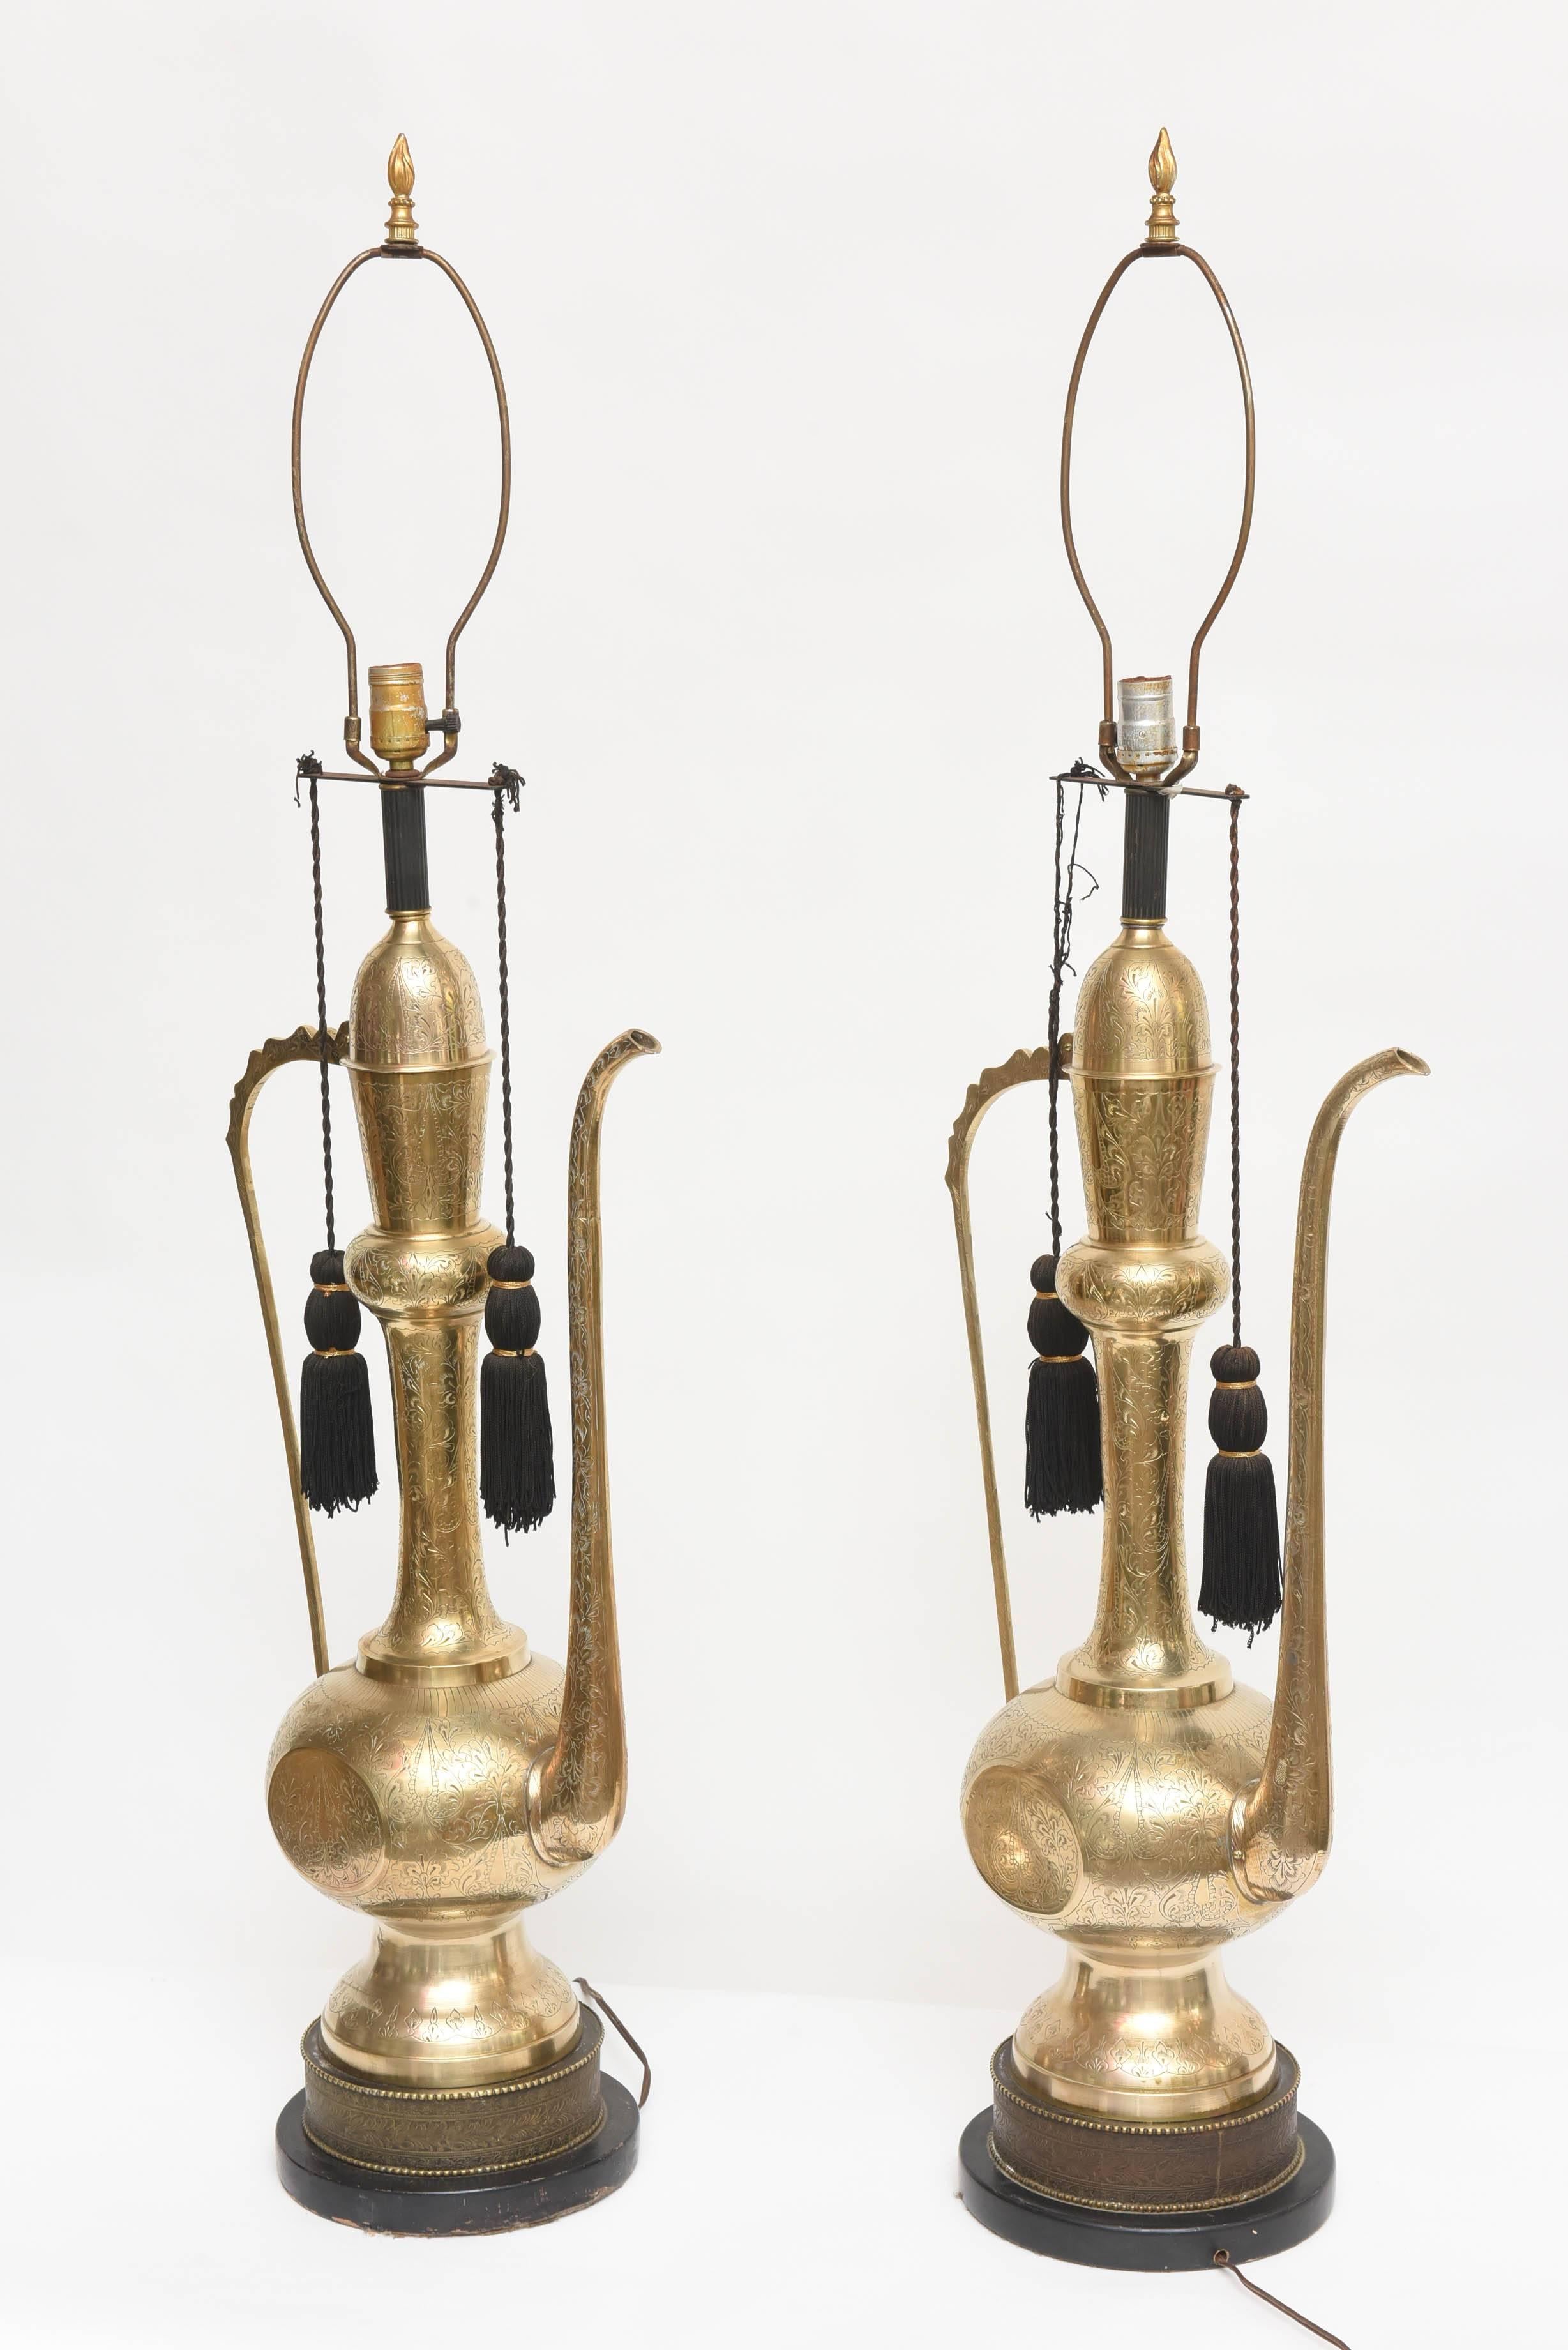 Exotic and dramatic pair of hand-wrought brass, beautifully etched Indian 'Aladdin' Tea Pitcher lamps. With decorative black tassels. Very large-scale! (Sold without shades).